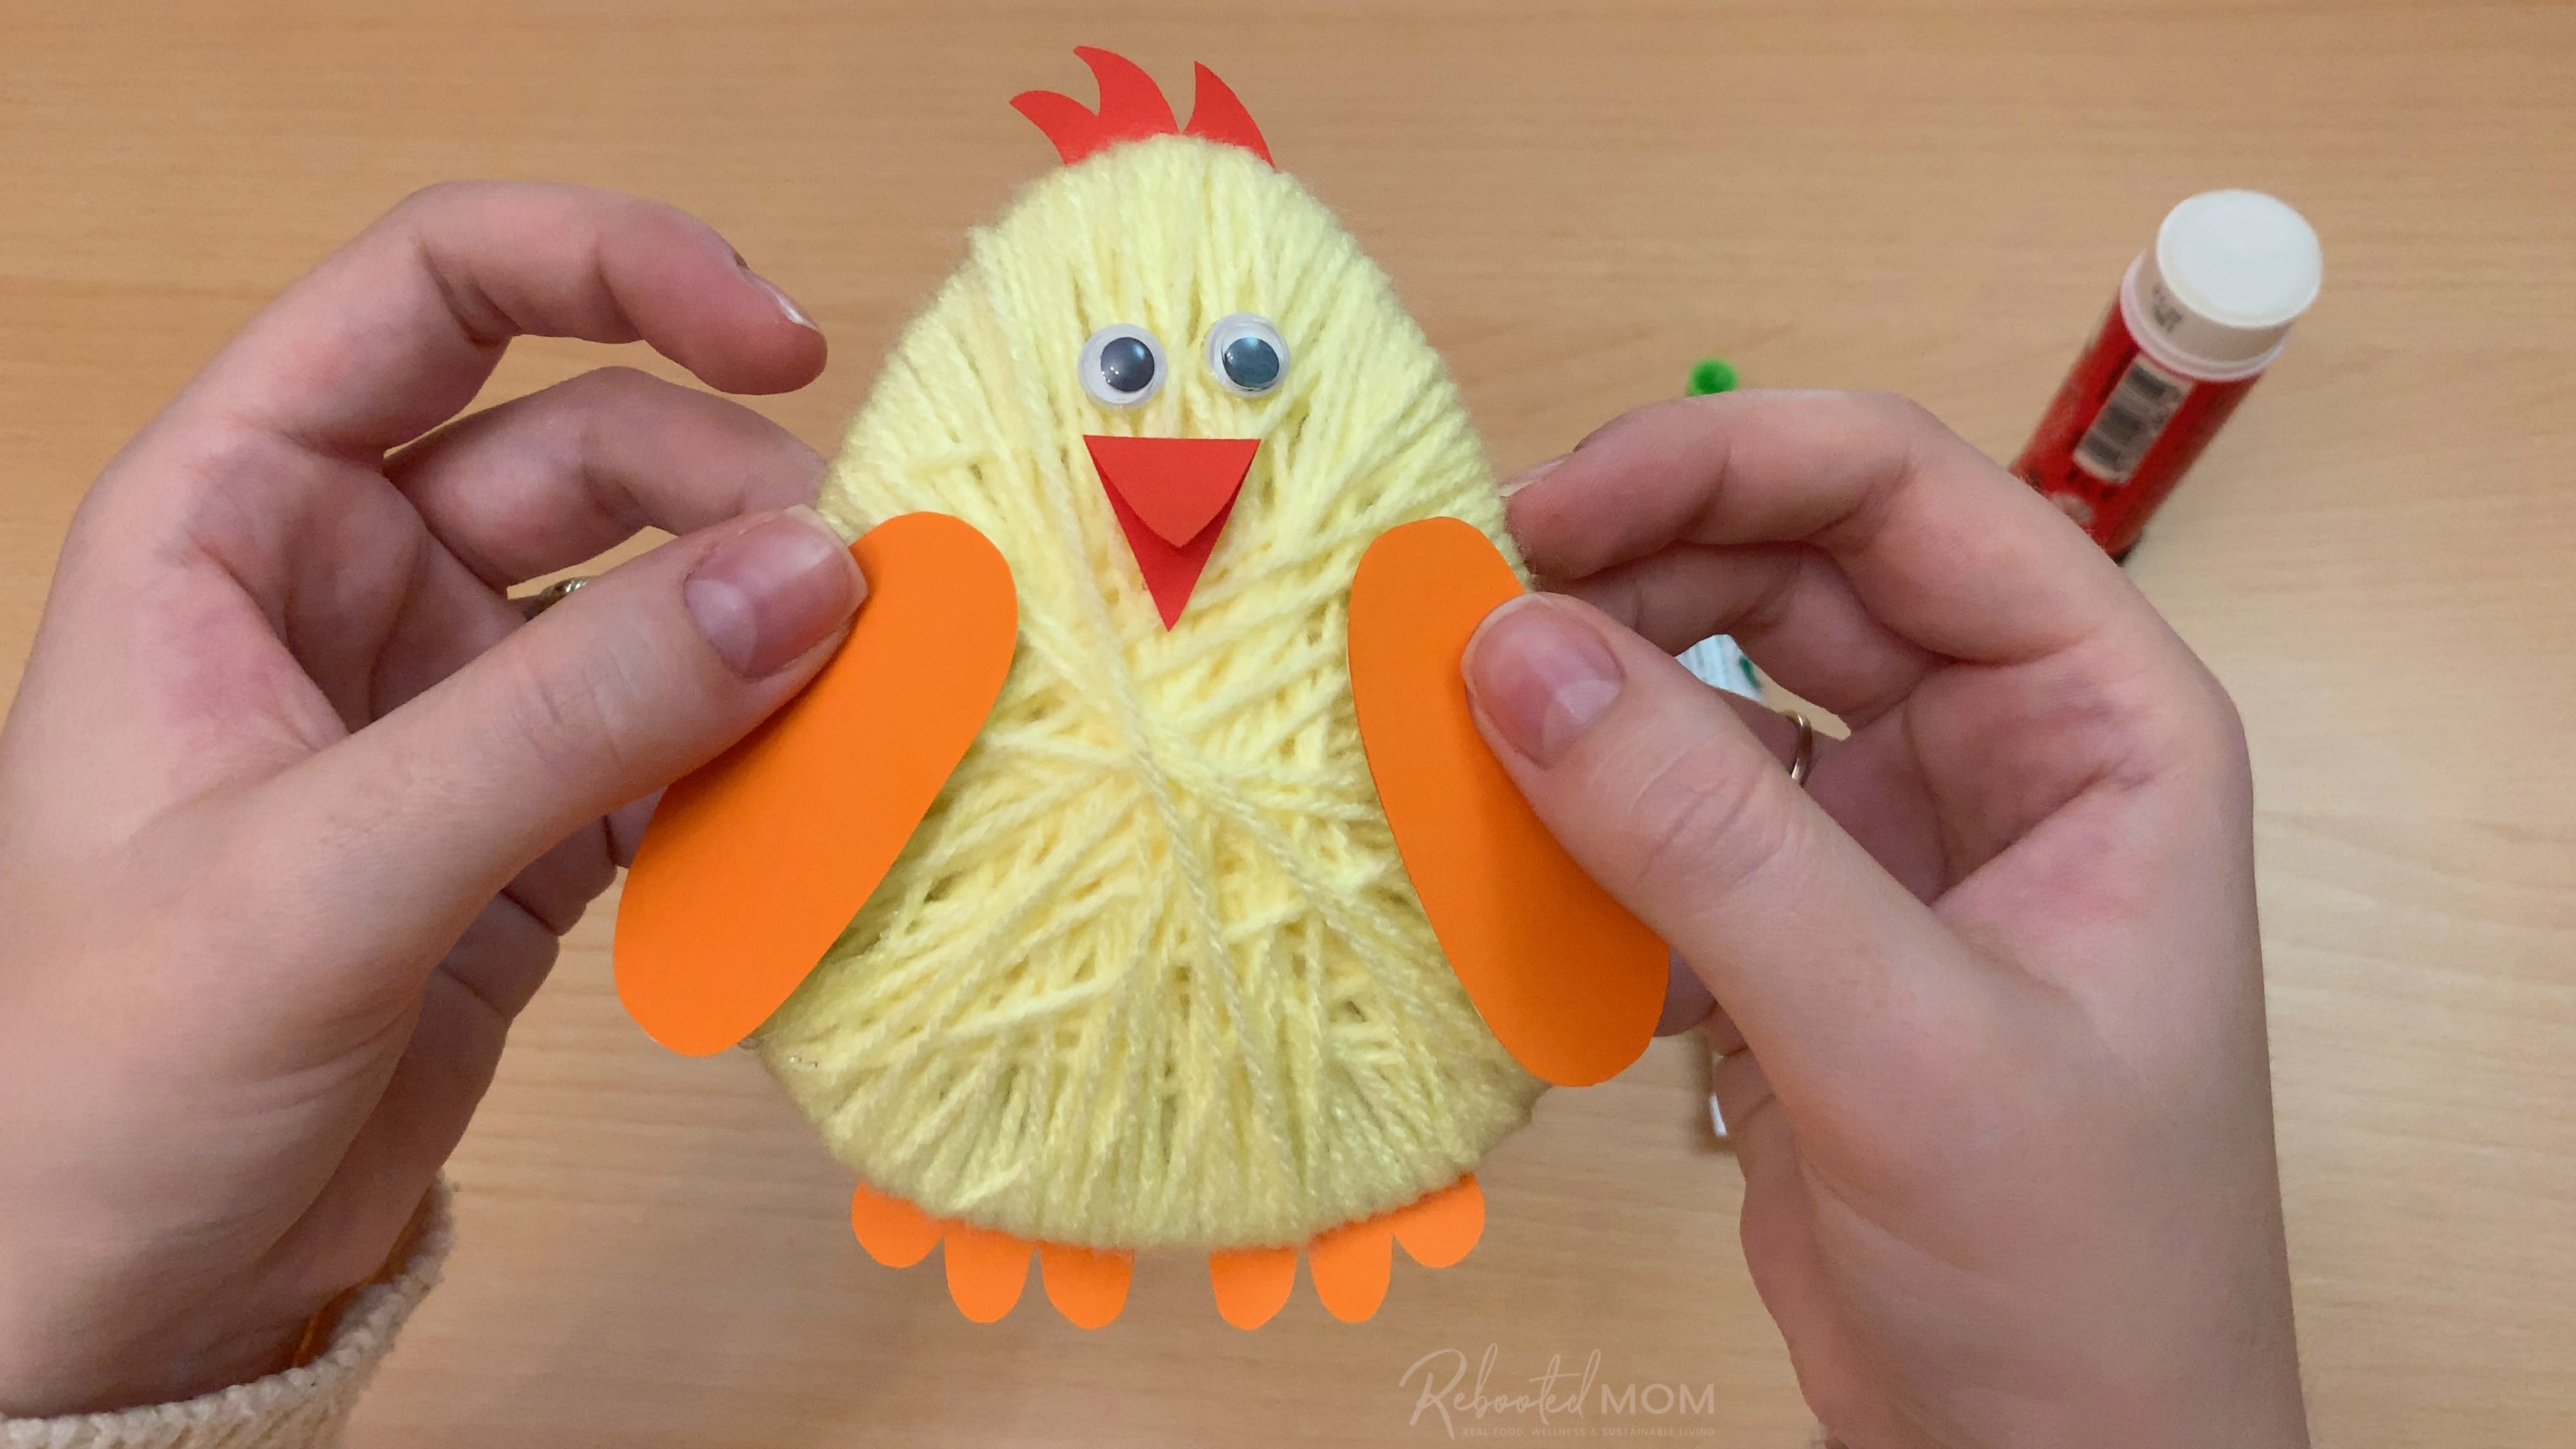 This adorable Easter Chick Yarn Craft is simple for kids to make and the perfect way to welcome spring and the Easter holiday!   